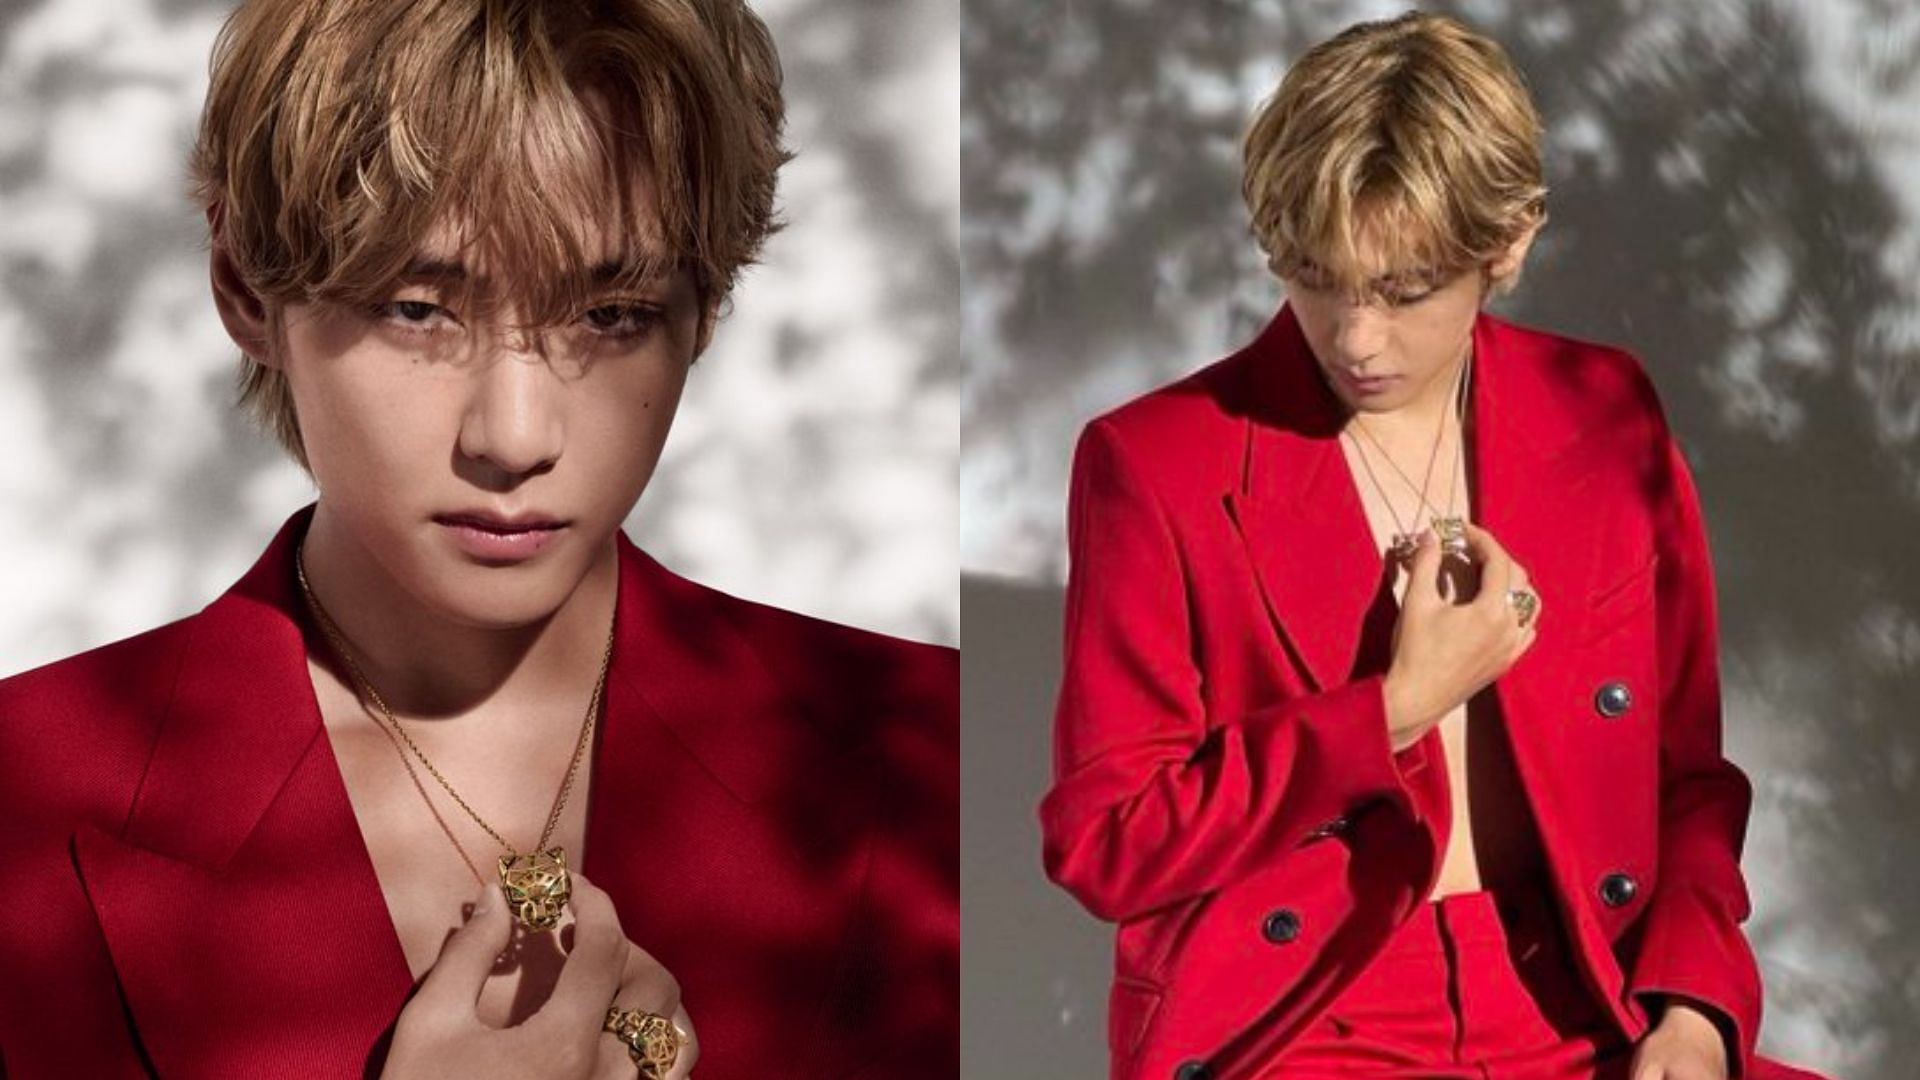 Taehyung in red should be illegal”: BTS fans celebrate as Singularity  singer is declared Cartier's new brand ambassador